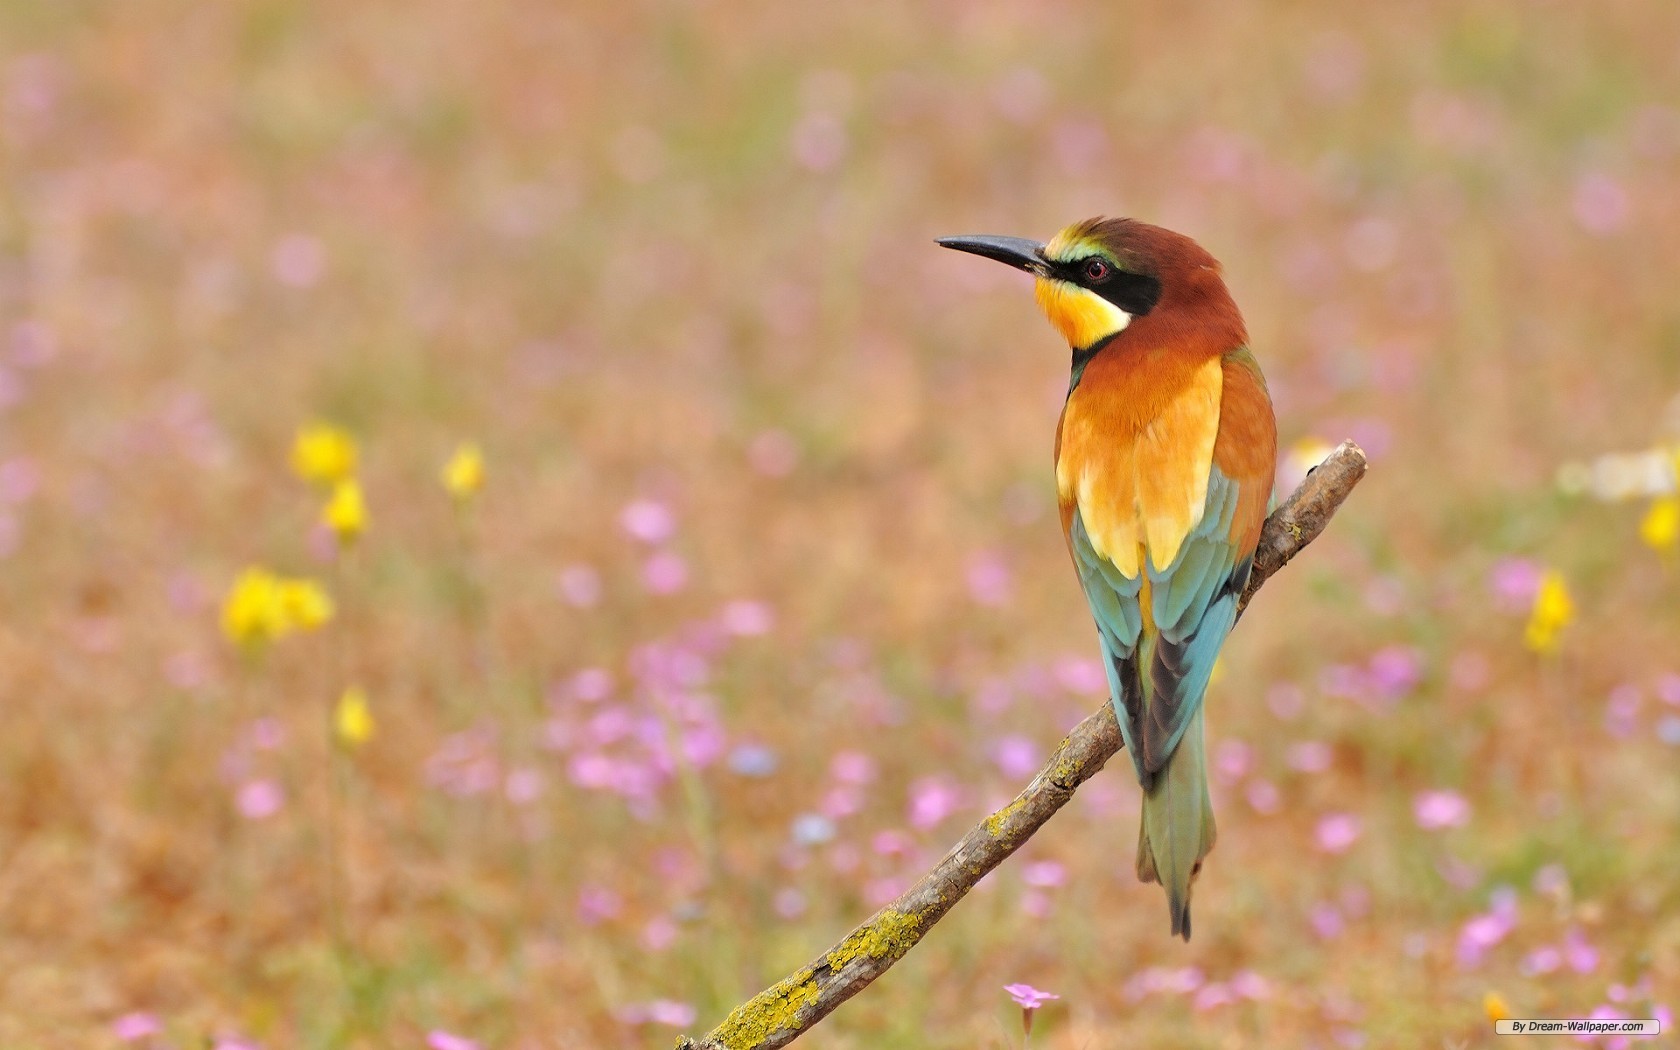 Spring Flowers And Birds Wallpapers Gallery